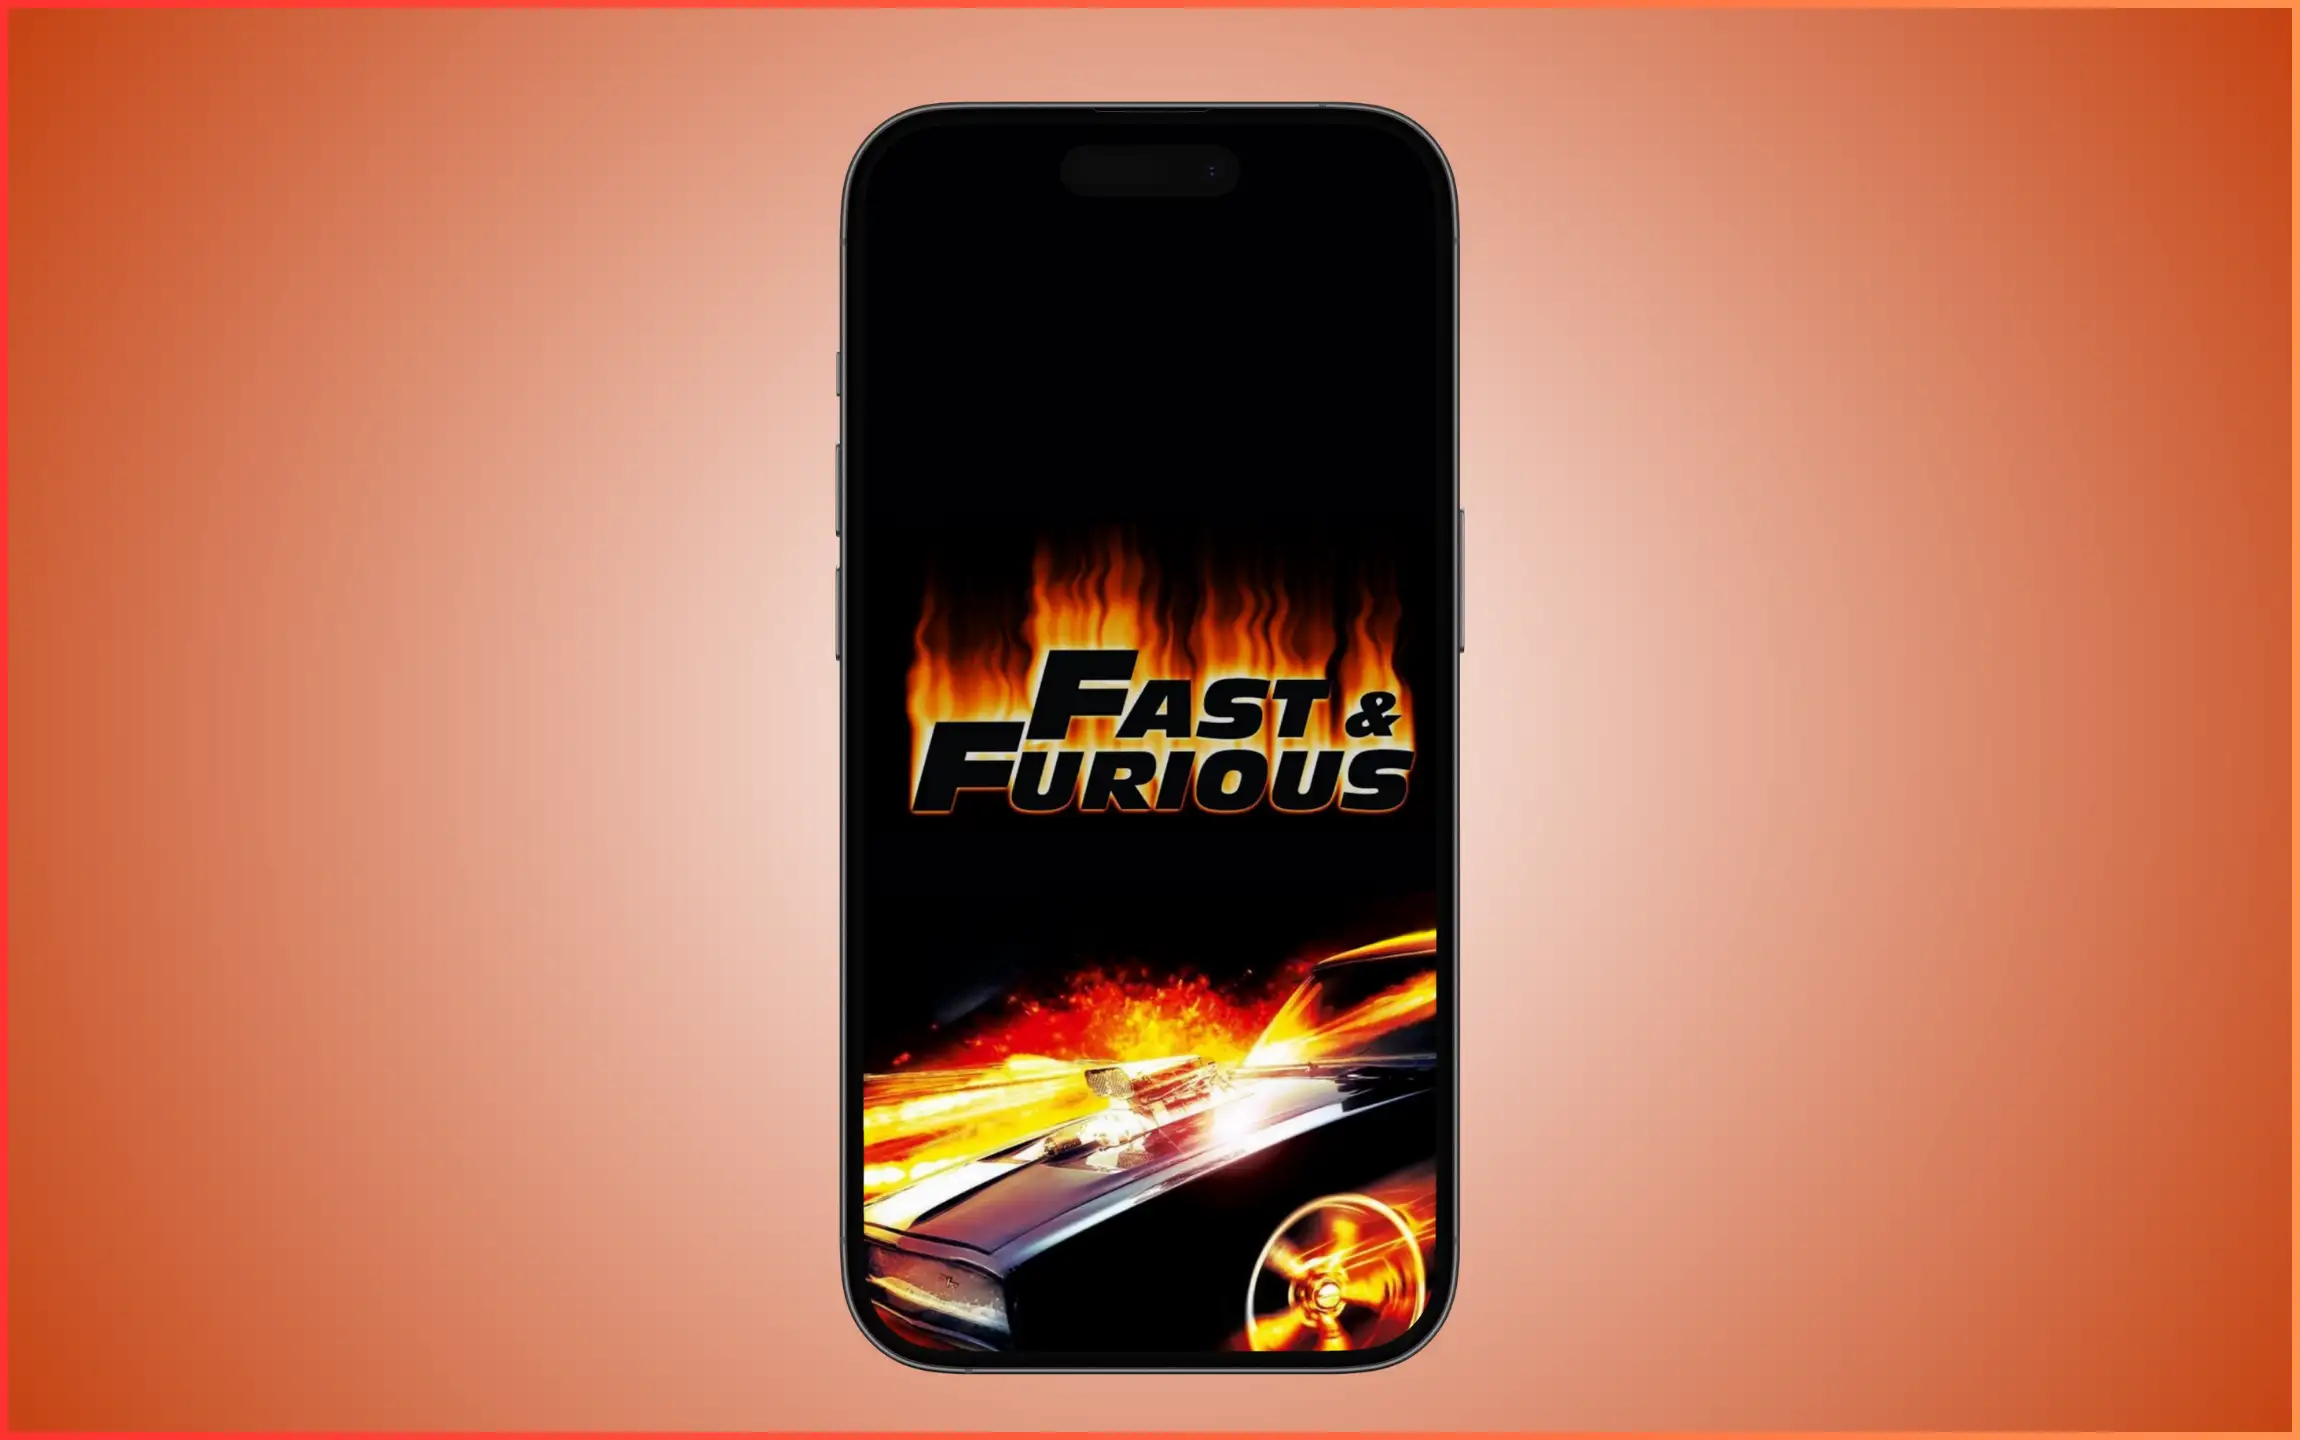 Fast and Furious Fire Wallpaper for iPhone